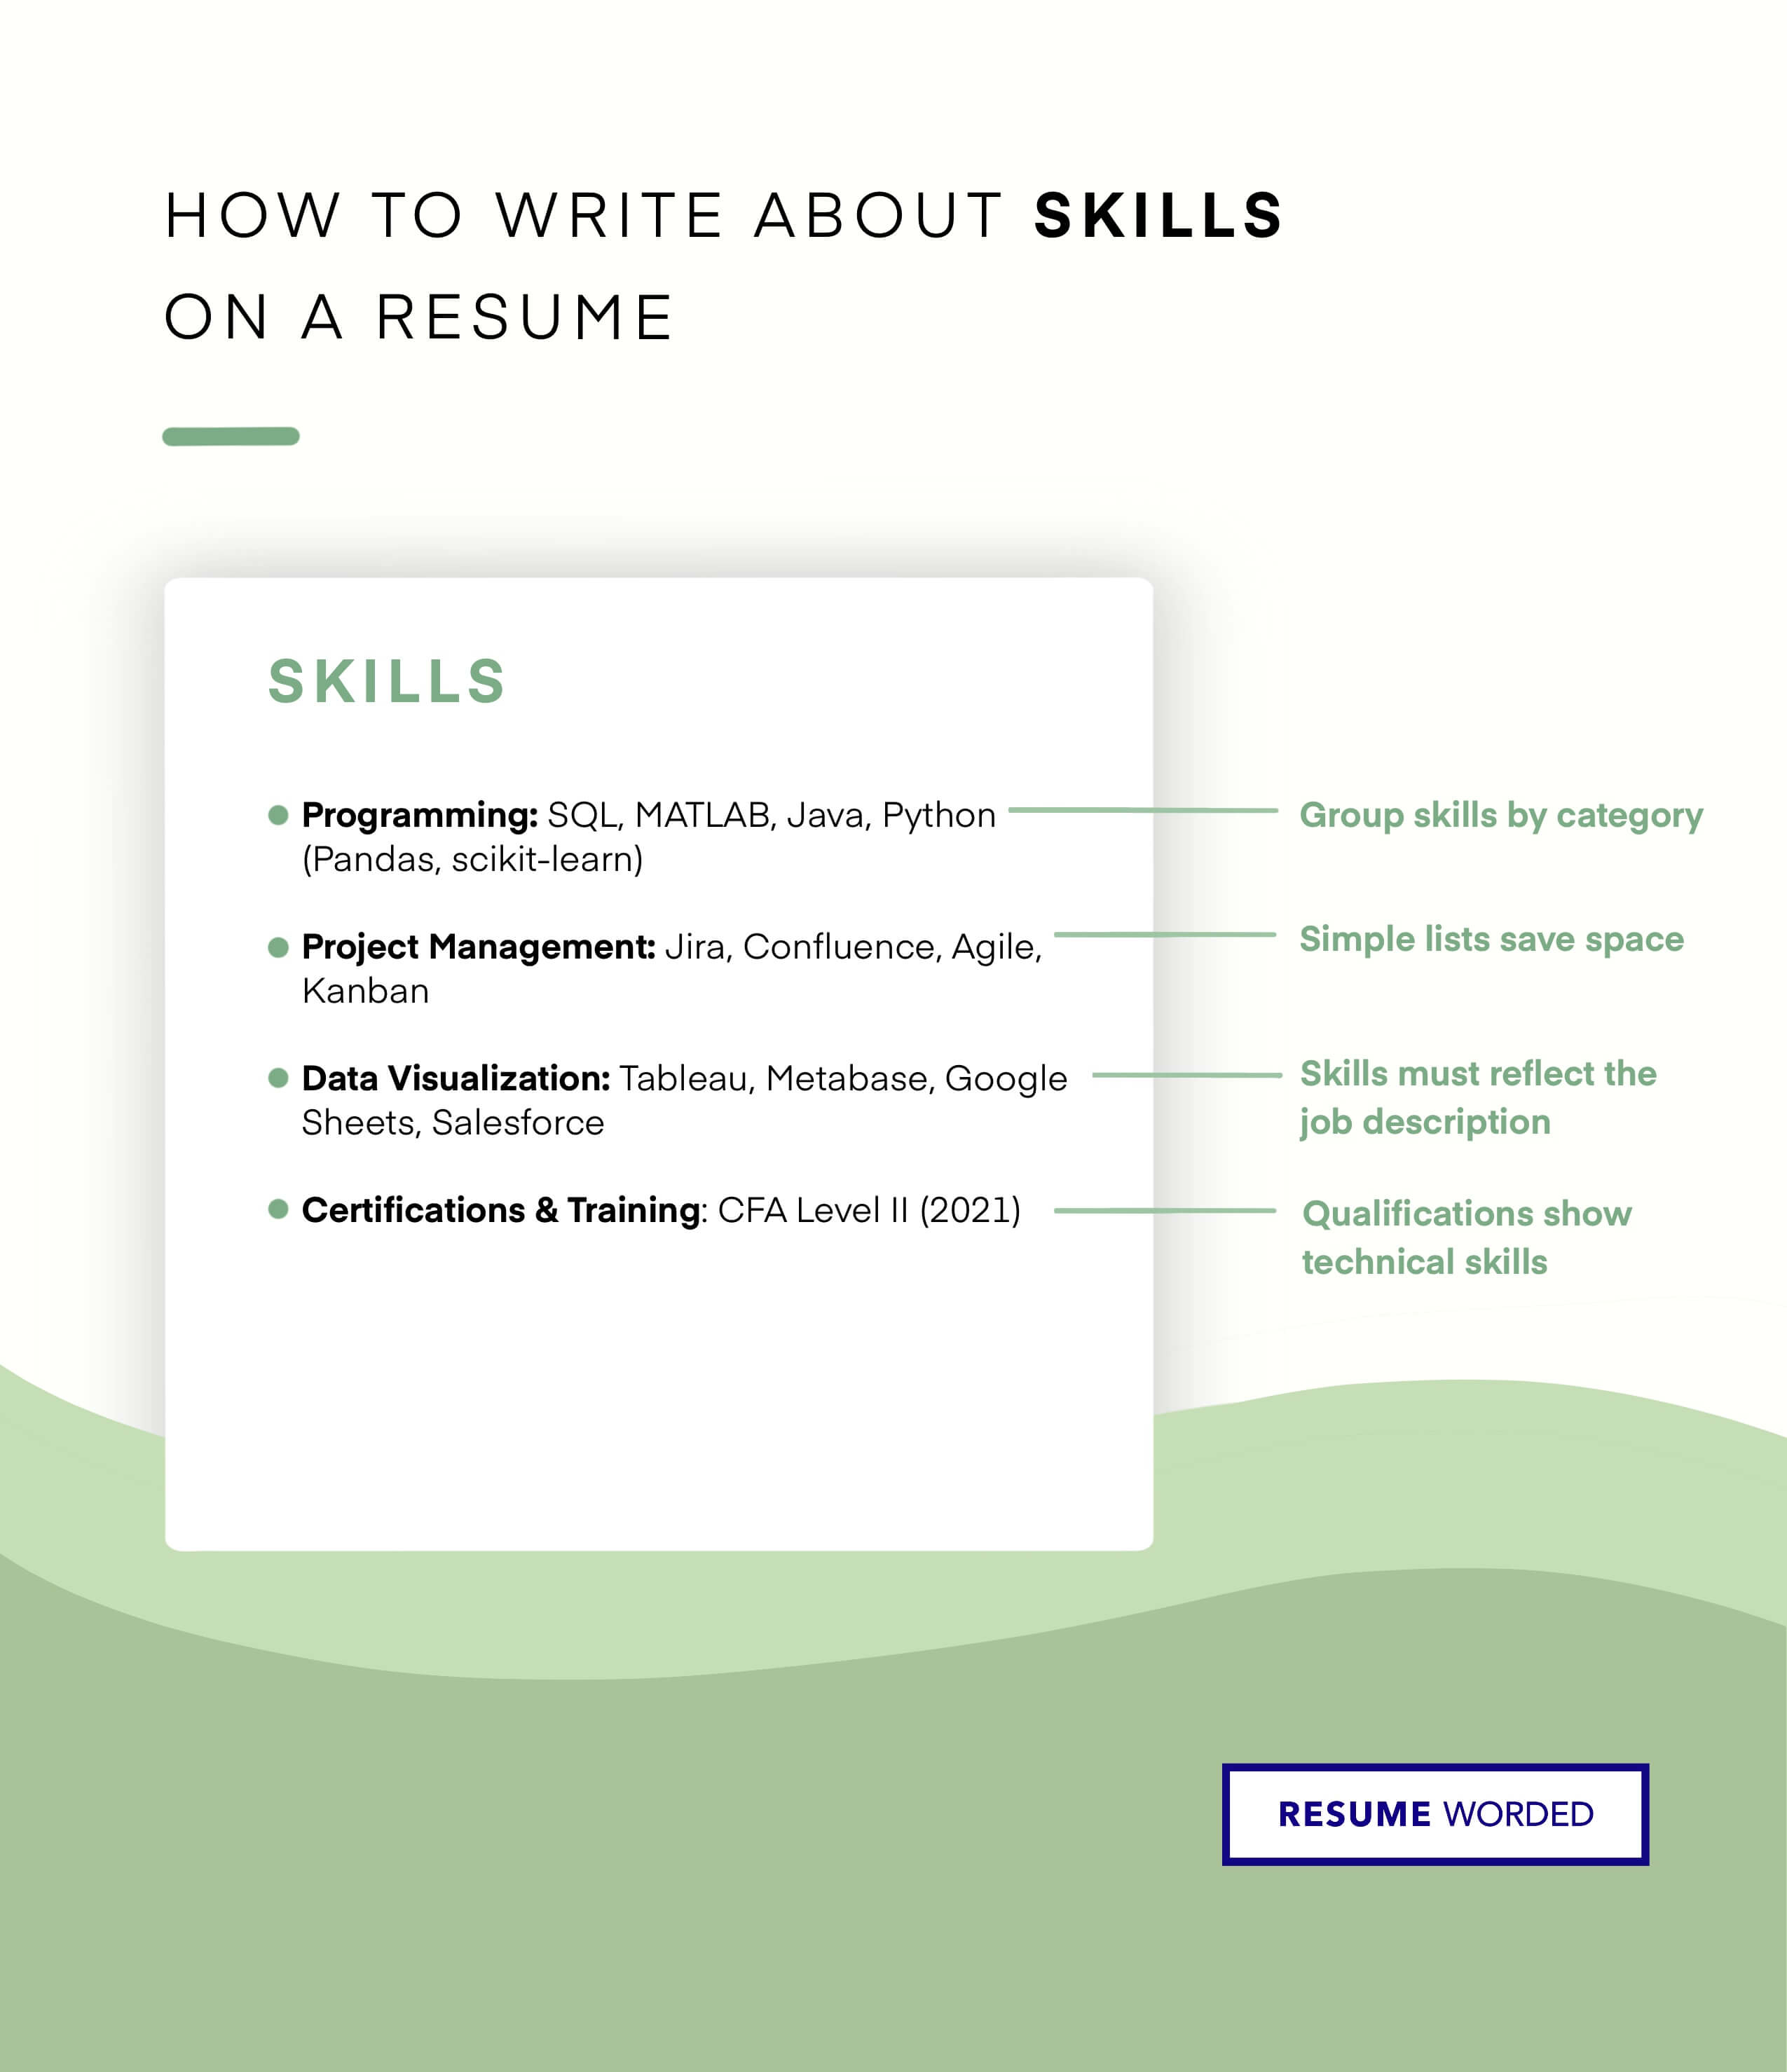 Use a clearly defined 'Skills & Other' section - Concise with summary Resume